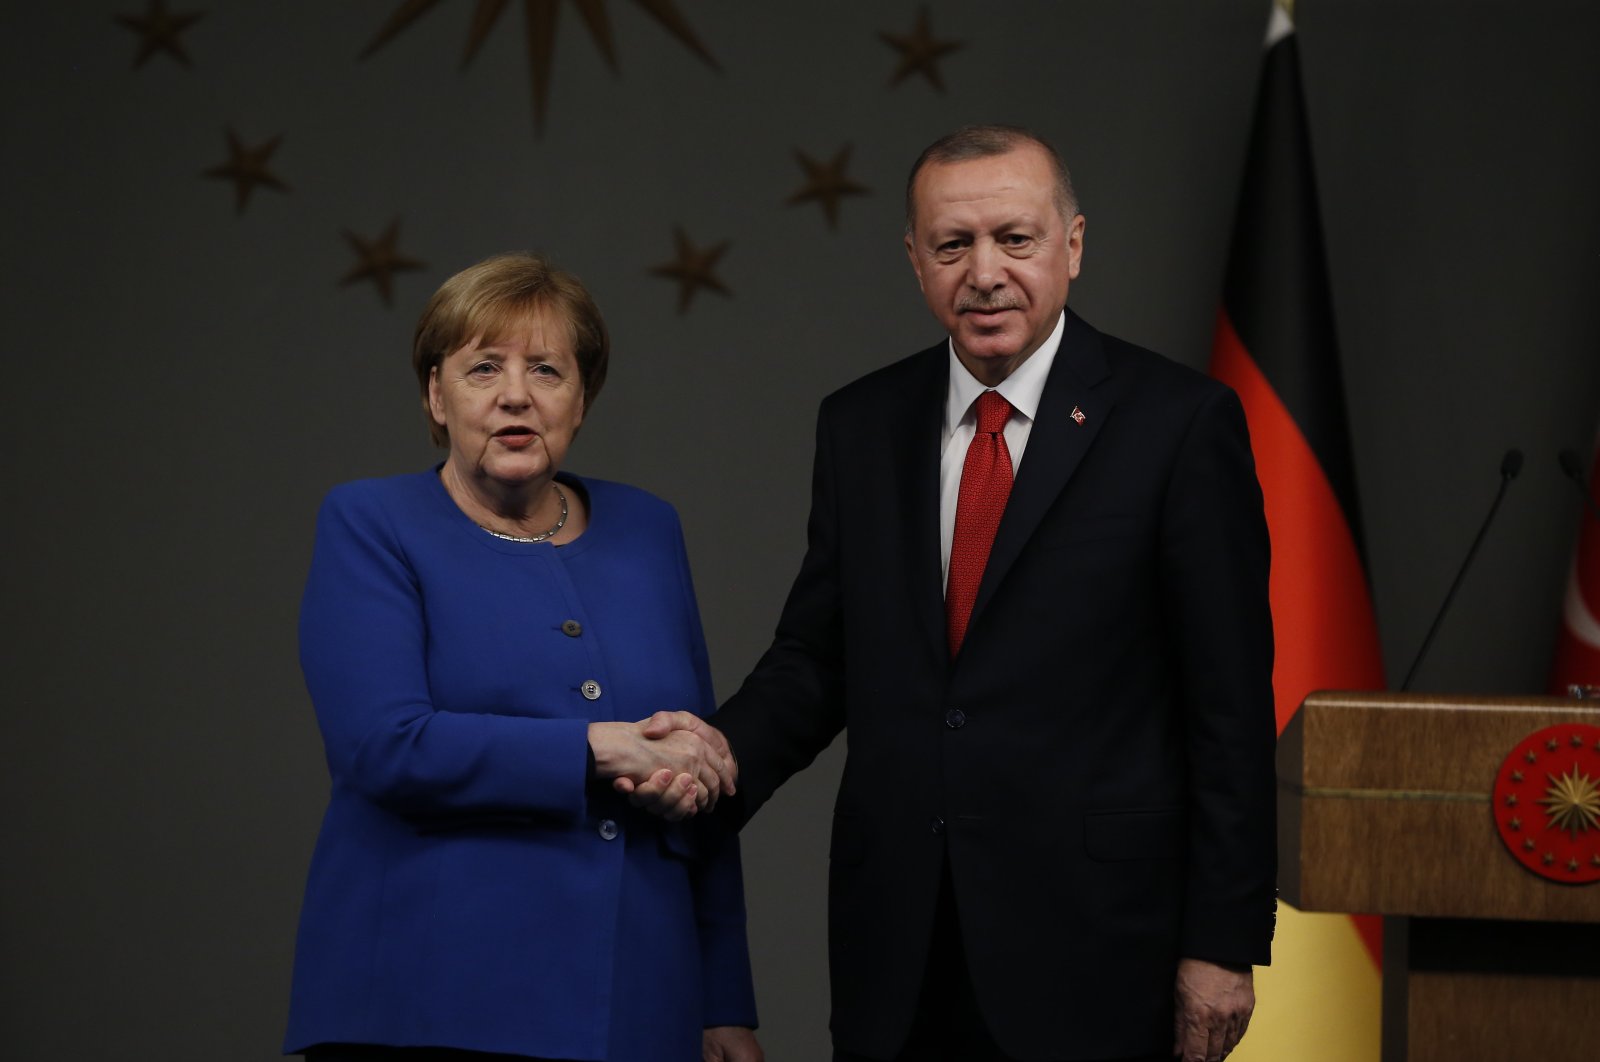 President Recep Tayyip Erdoğan (right) shakes hands with Germany's Chancellor Angela Merkel, (left) following their joint news conference after their meeting in Istanbul, Friday, Jan. 24, 2020. (AP Photo)